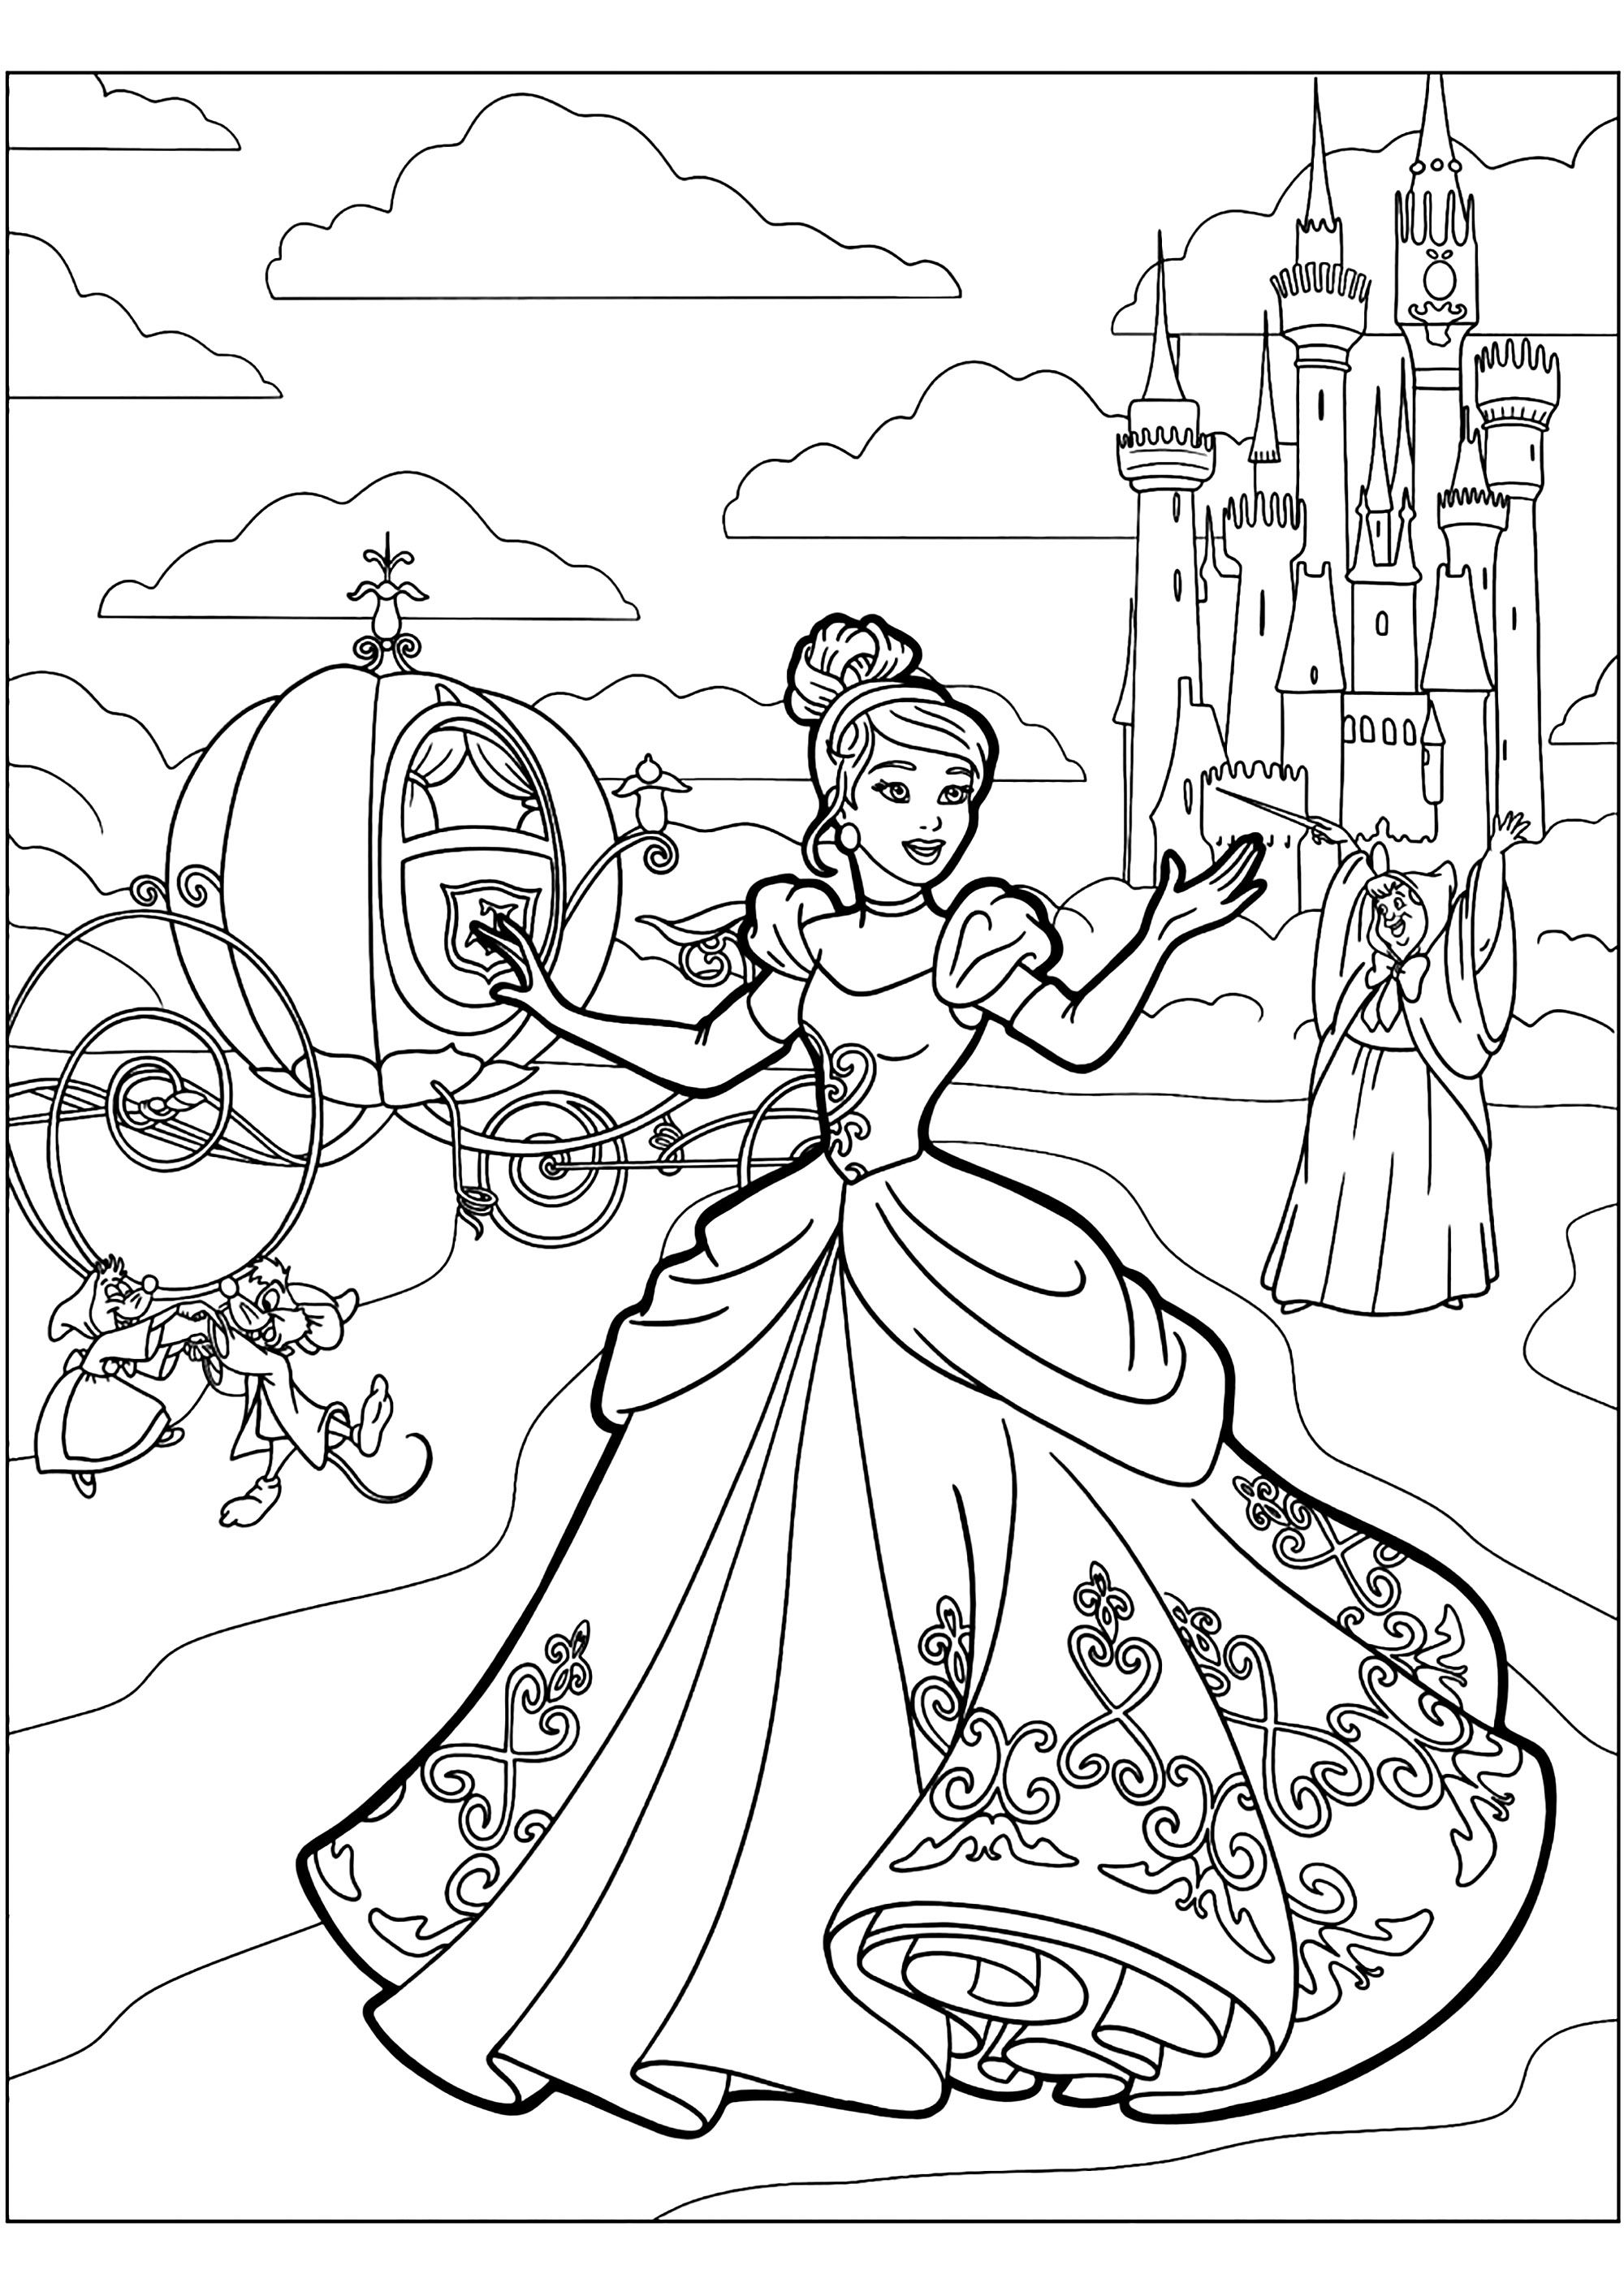 Cinderella coloring page, with the Prince's castle in the background and the fairy godmother.